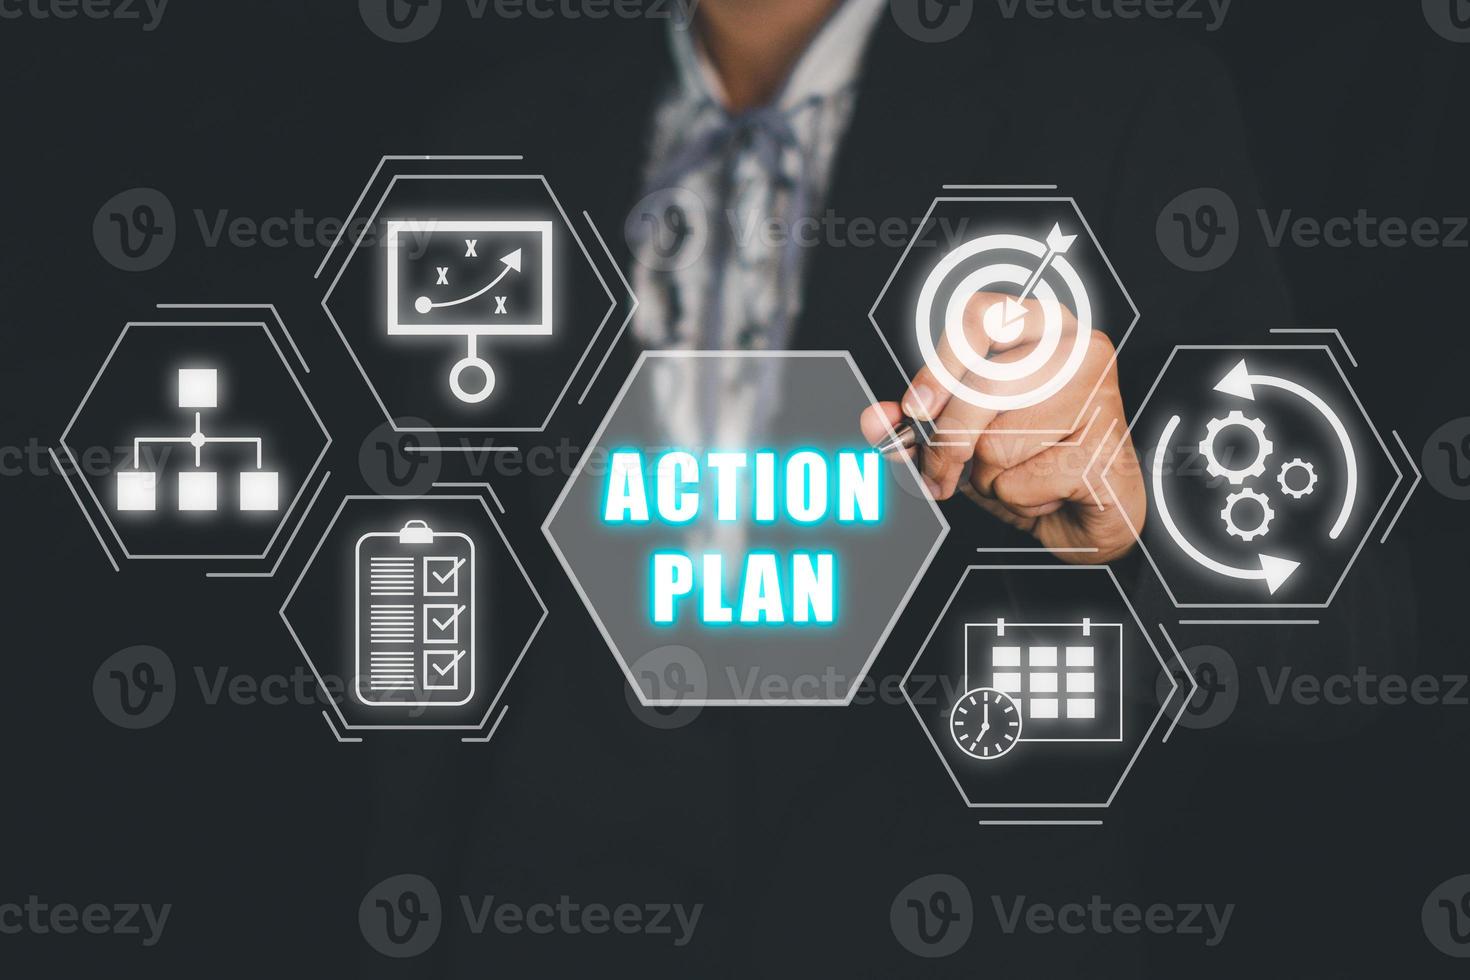 Action plan strategy vision planning direction concept, Business person hand touching action plan icon on VR screen. photo